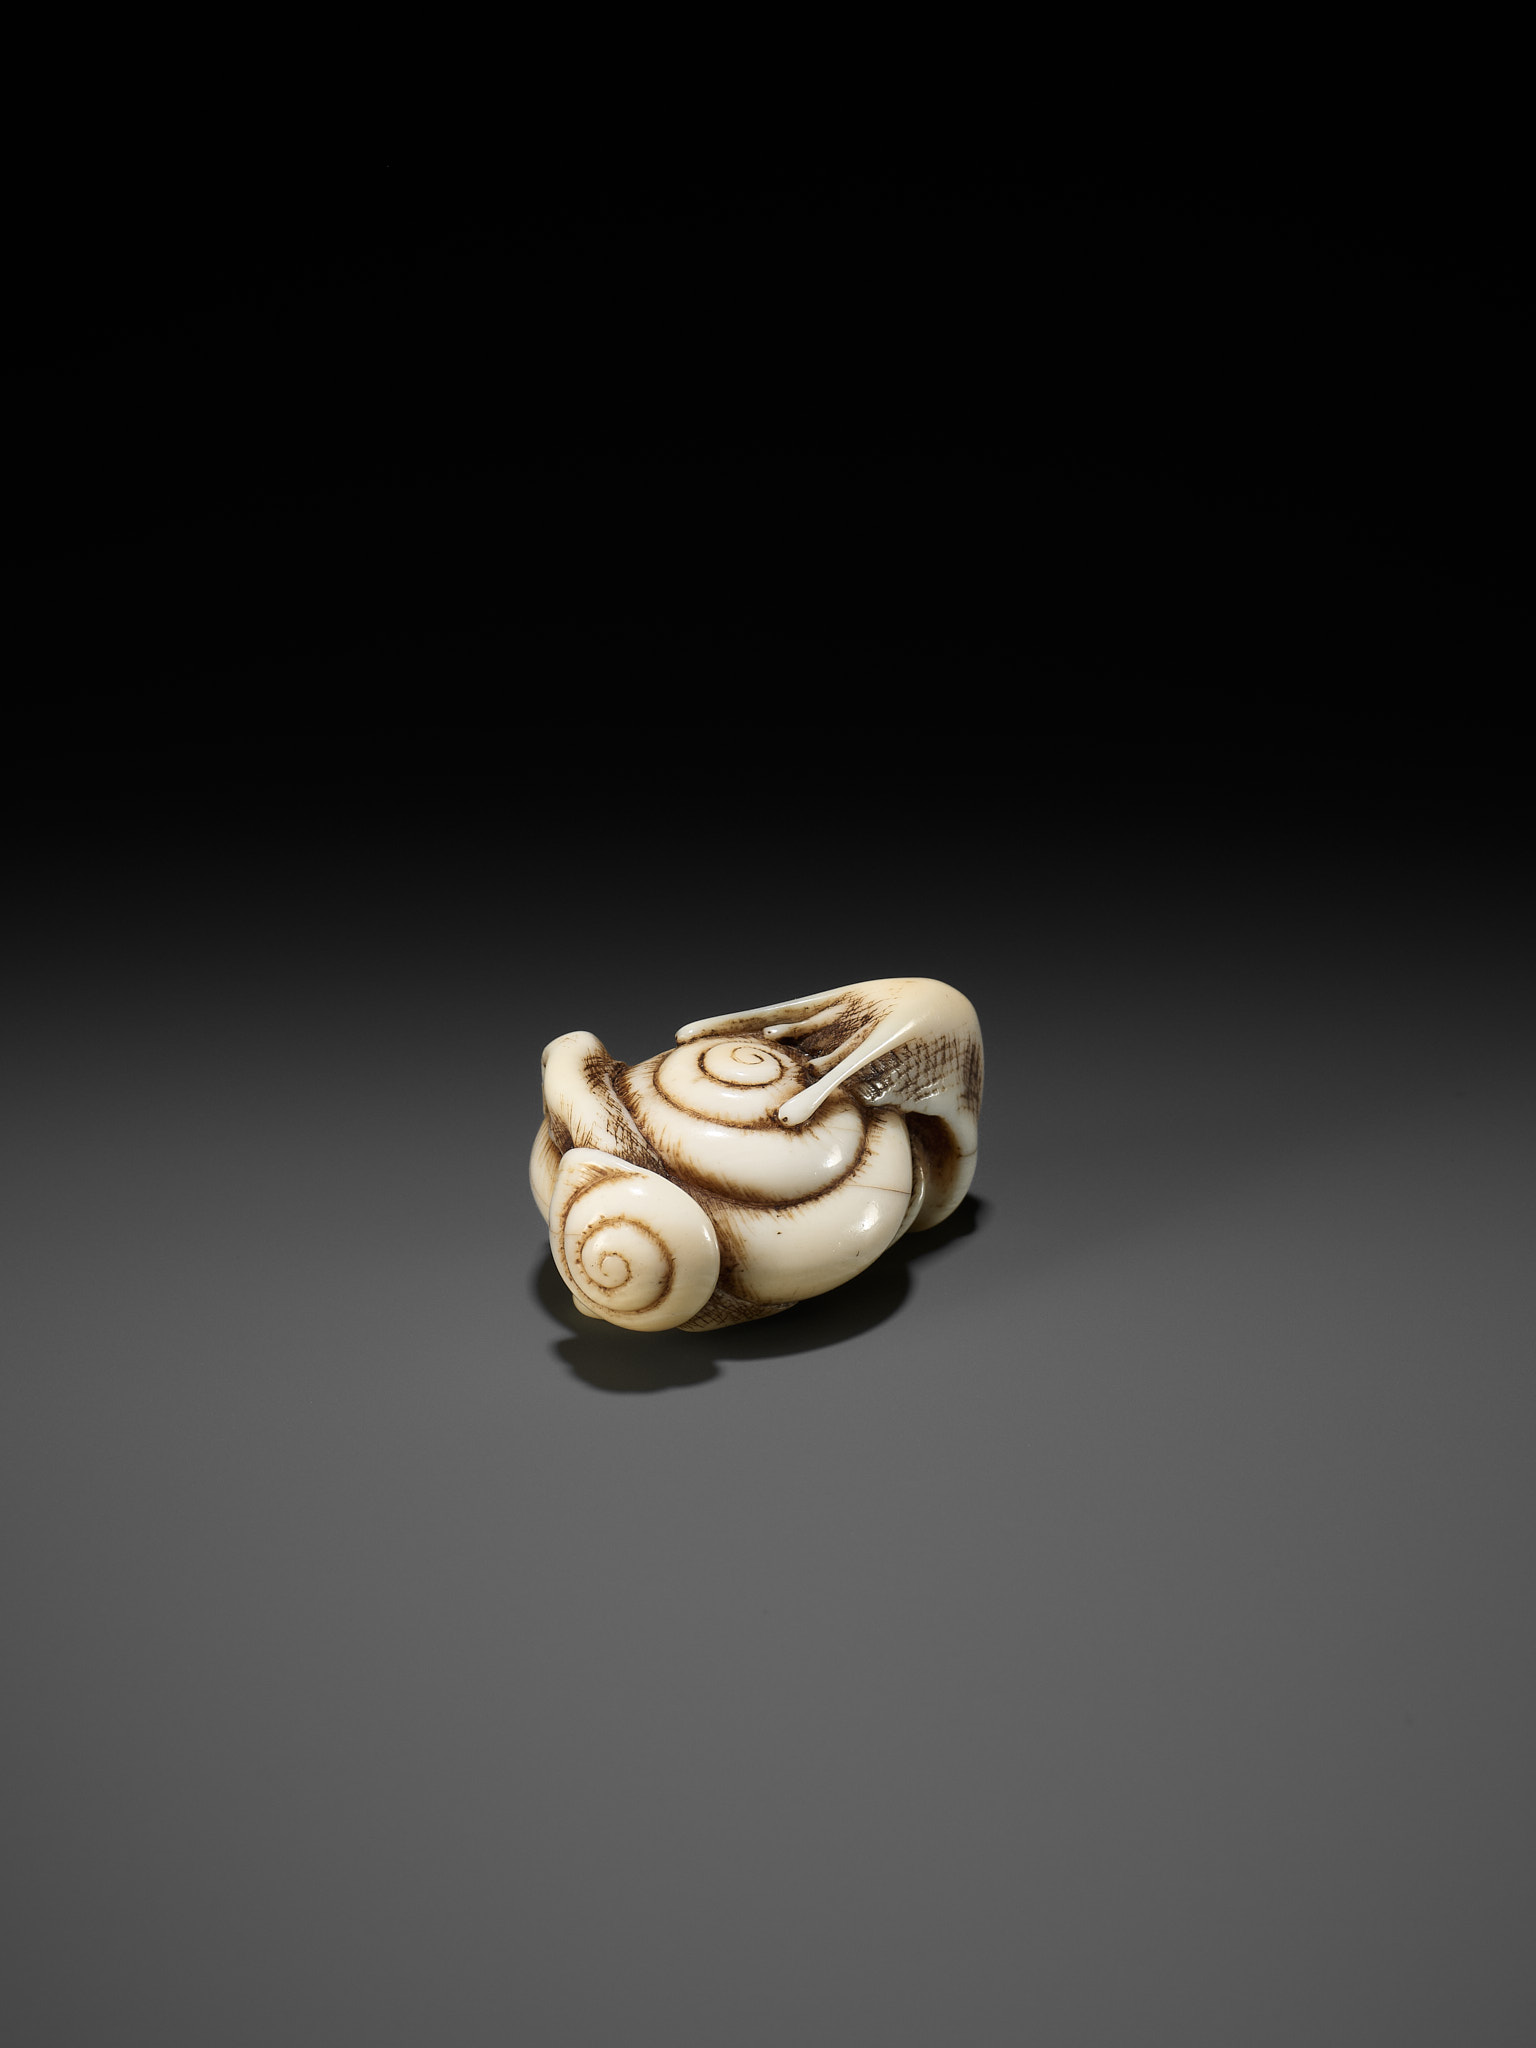 A FINE IVORY NETSUKE DEPICTING A PAIR OF SNAILS - Image 6 of 11